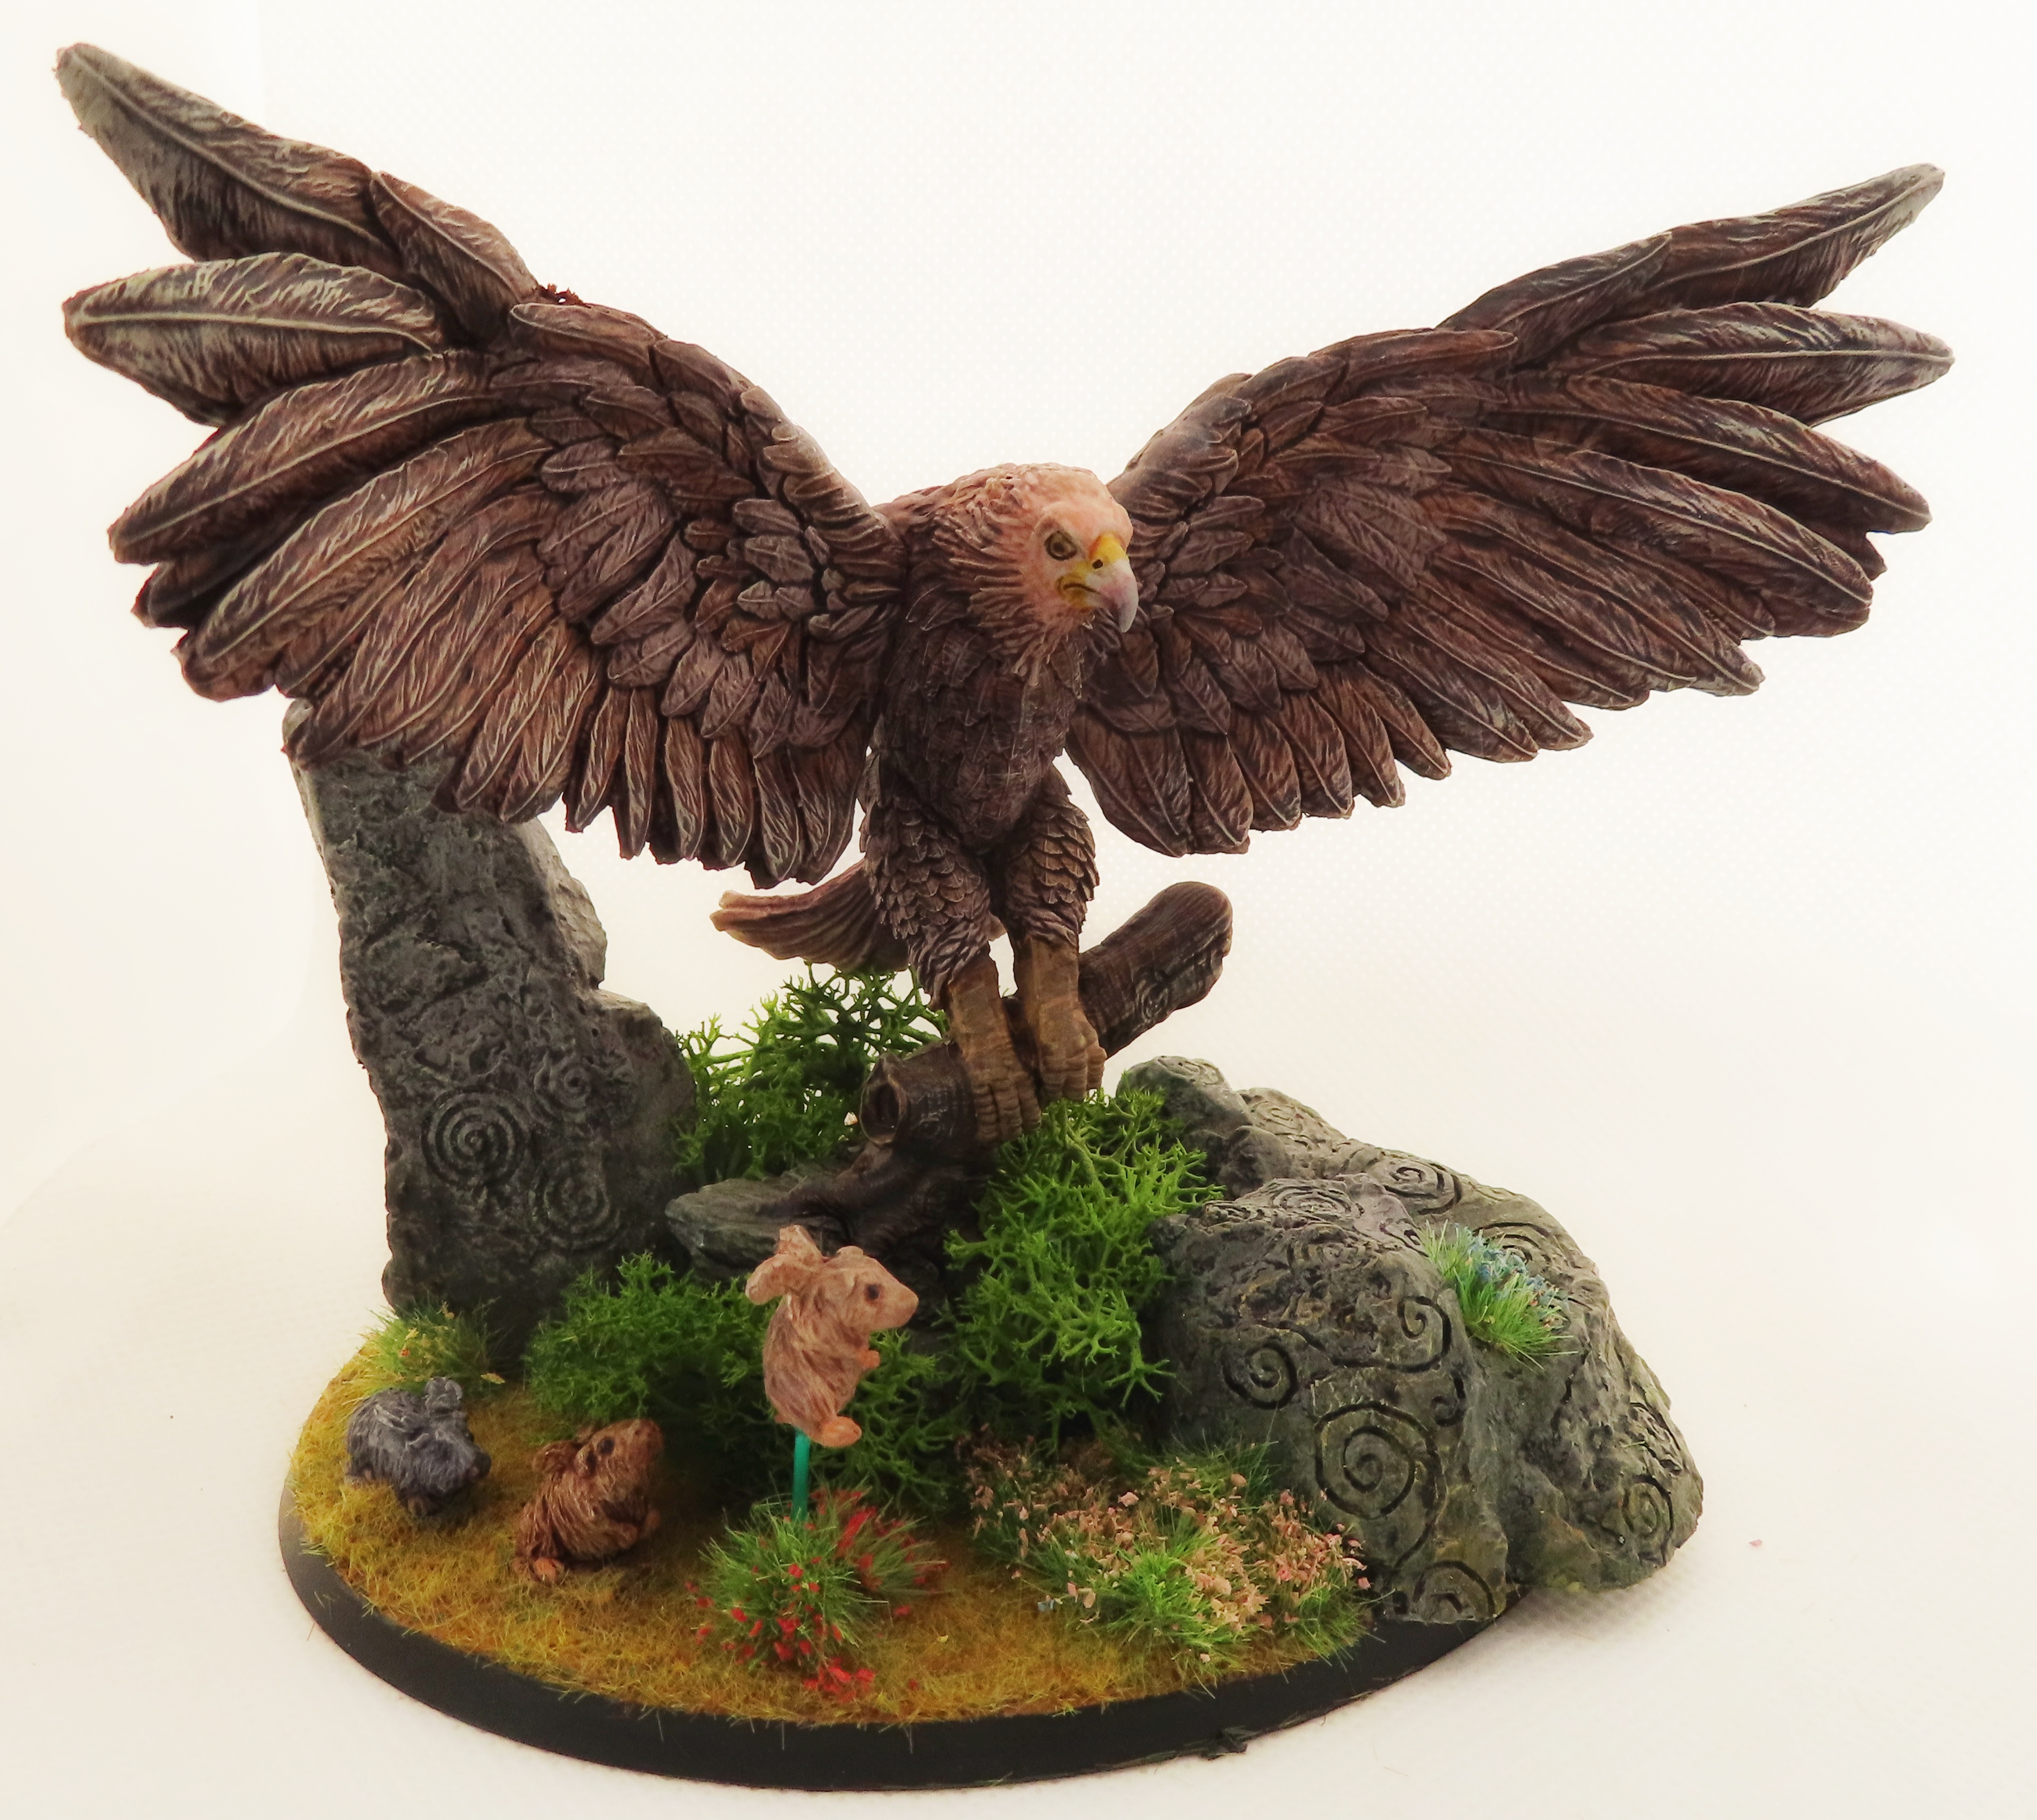 Eagle Diorama #1 by thedace